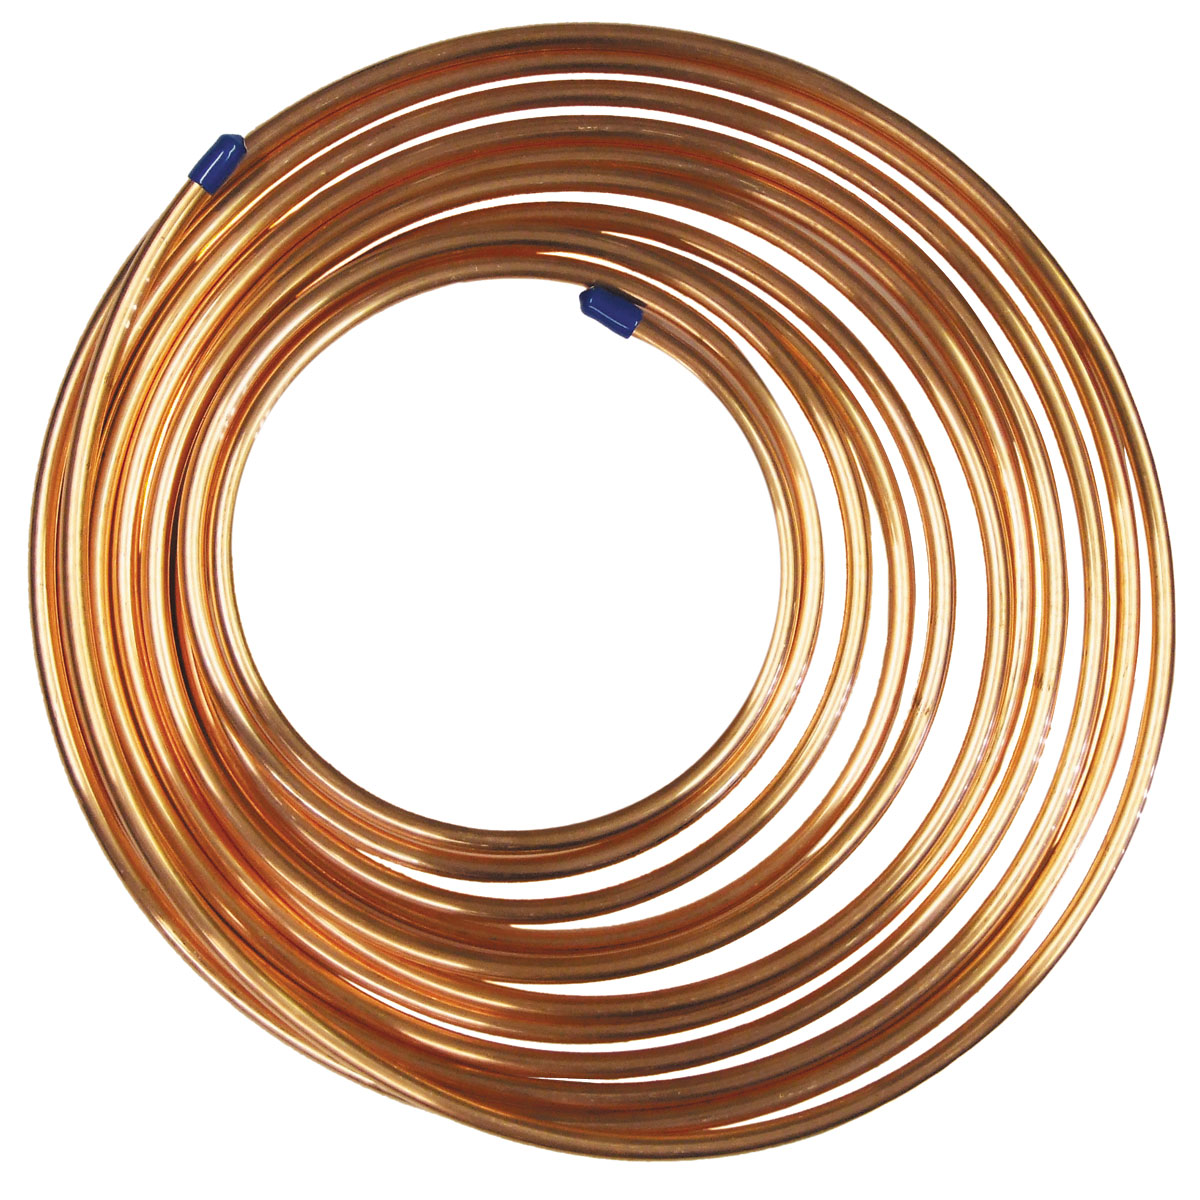 8mm OD Copper Tube (30mtrs)